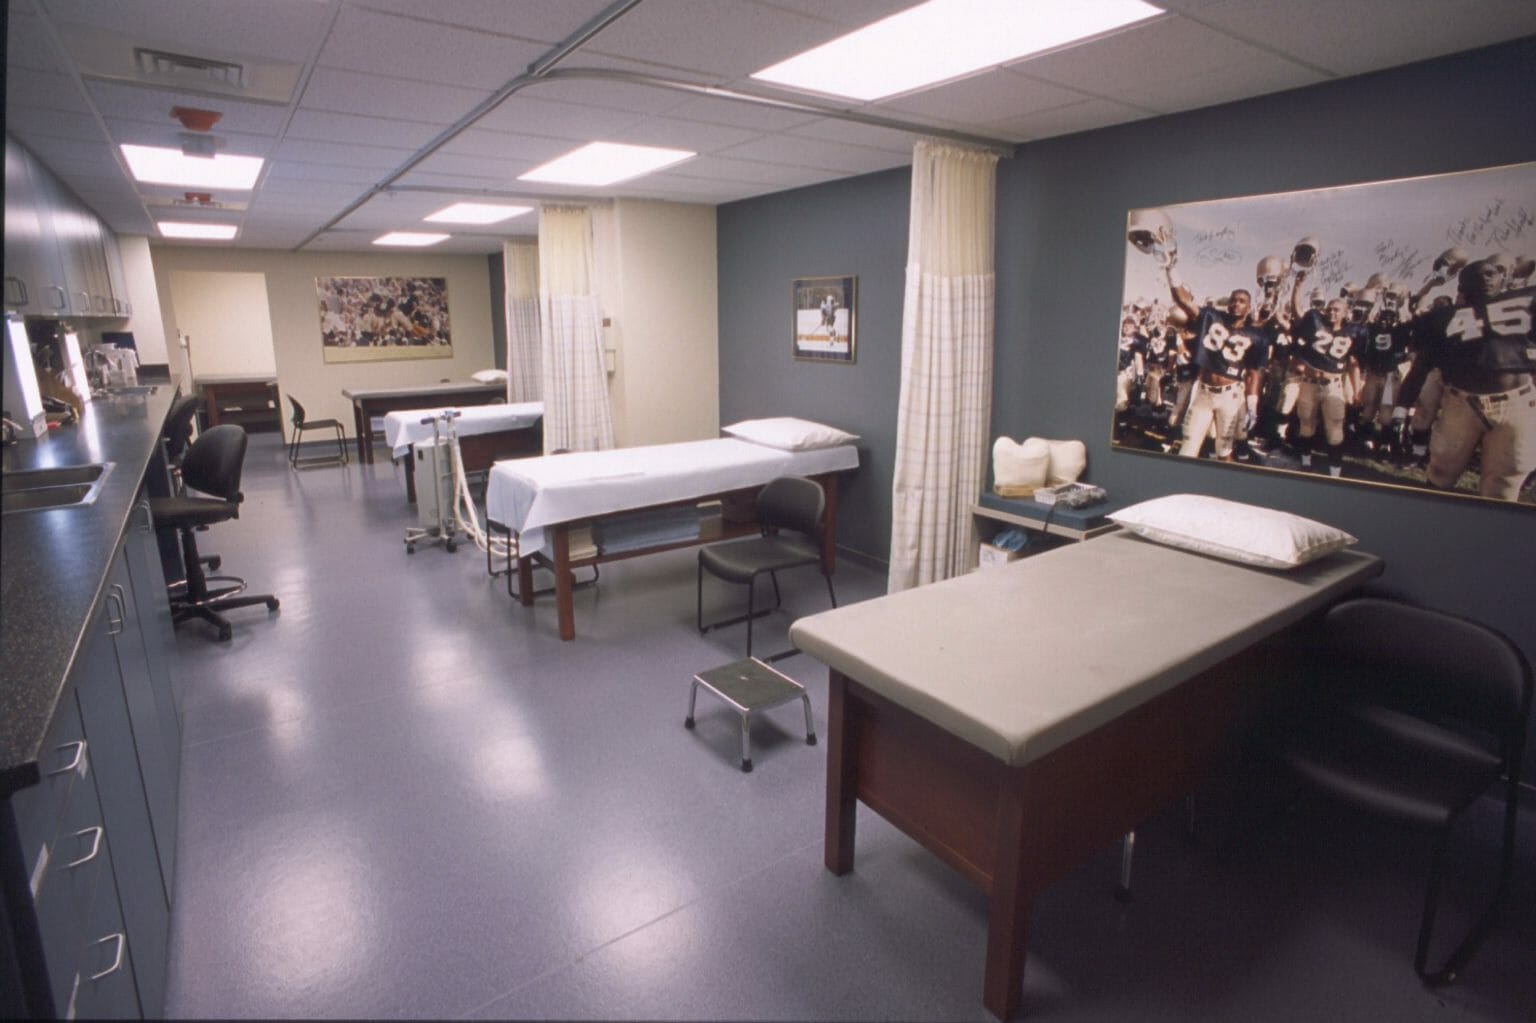 Room with multiple patient beds that are seperated by curtains with sport-related wall décor